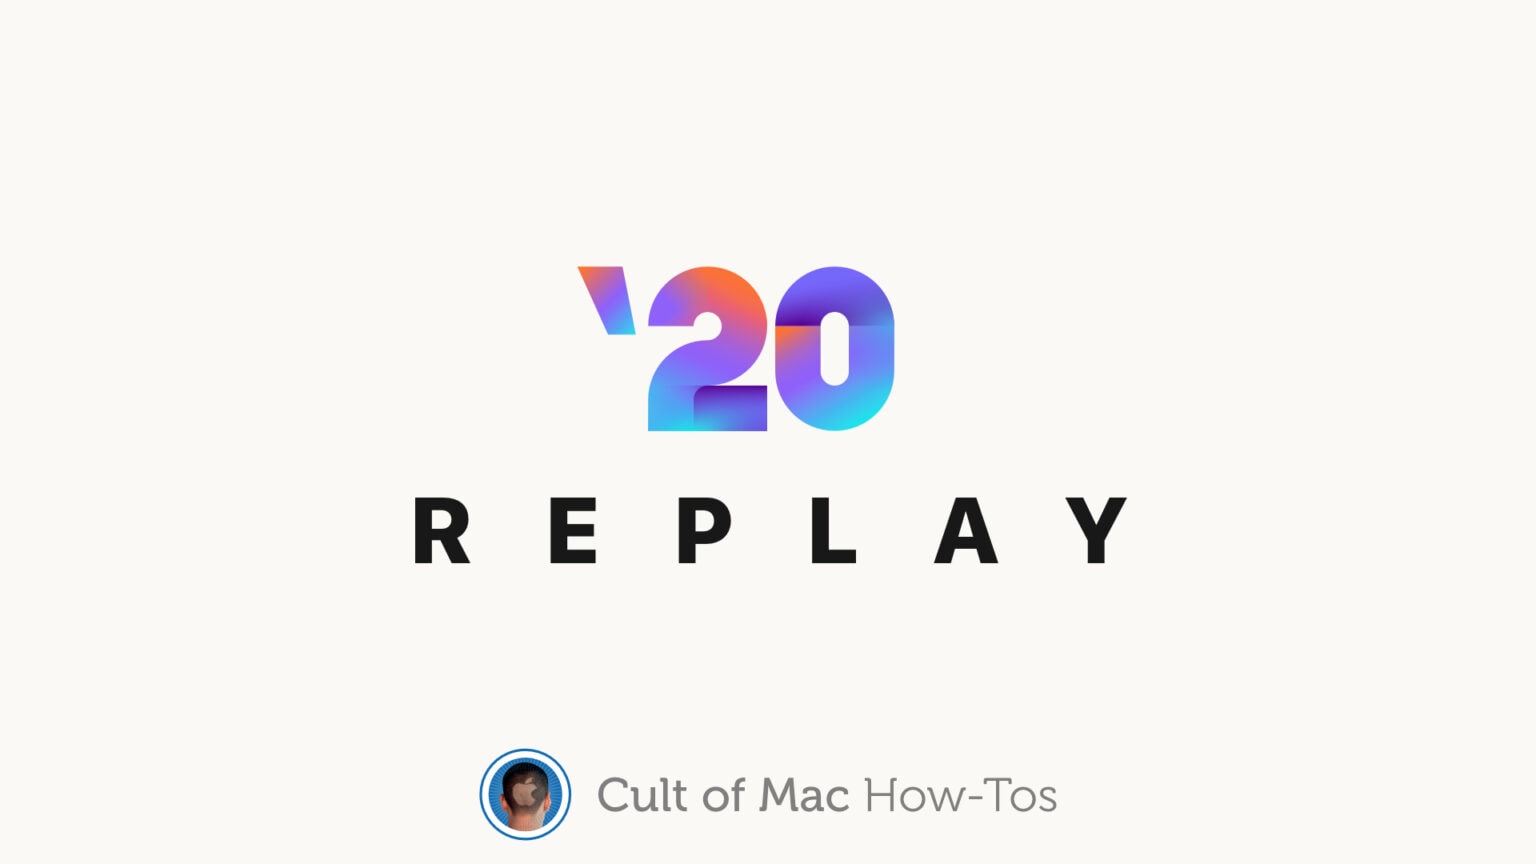 How to get Apple Music 2020 Replay mix